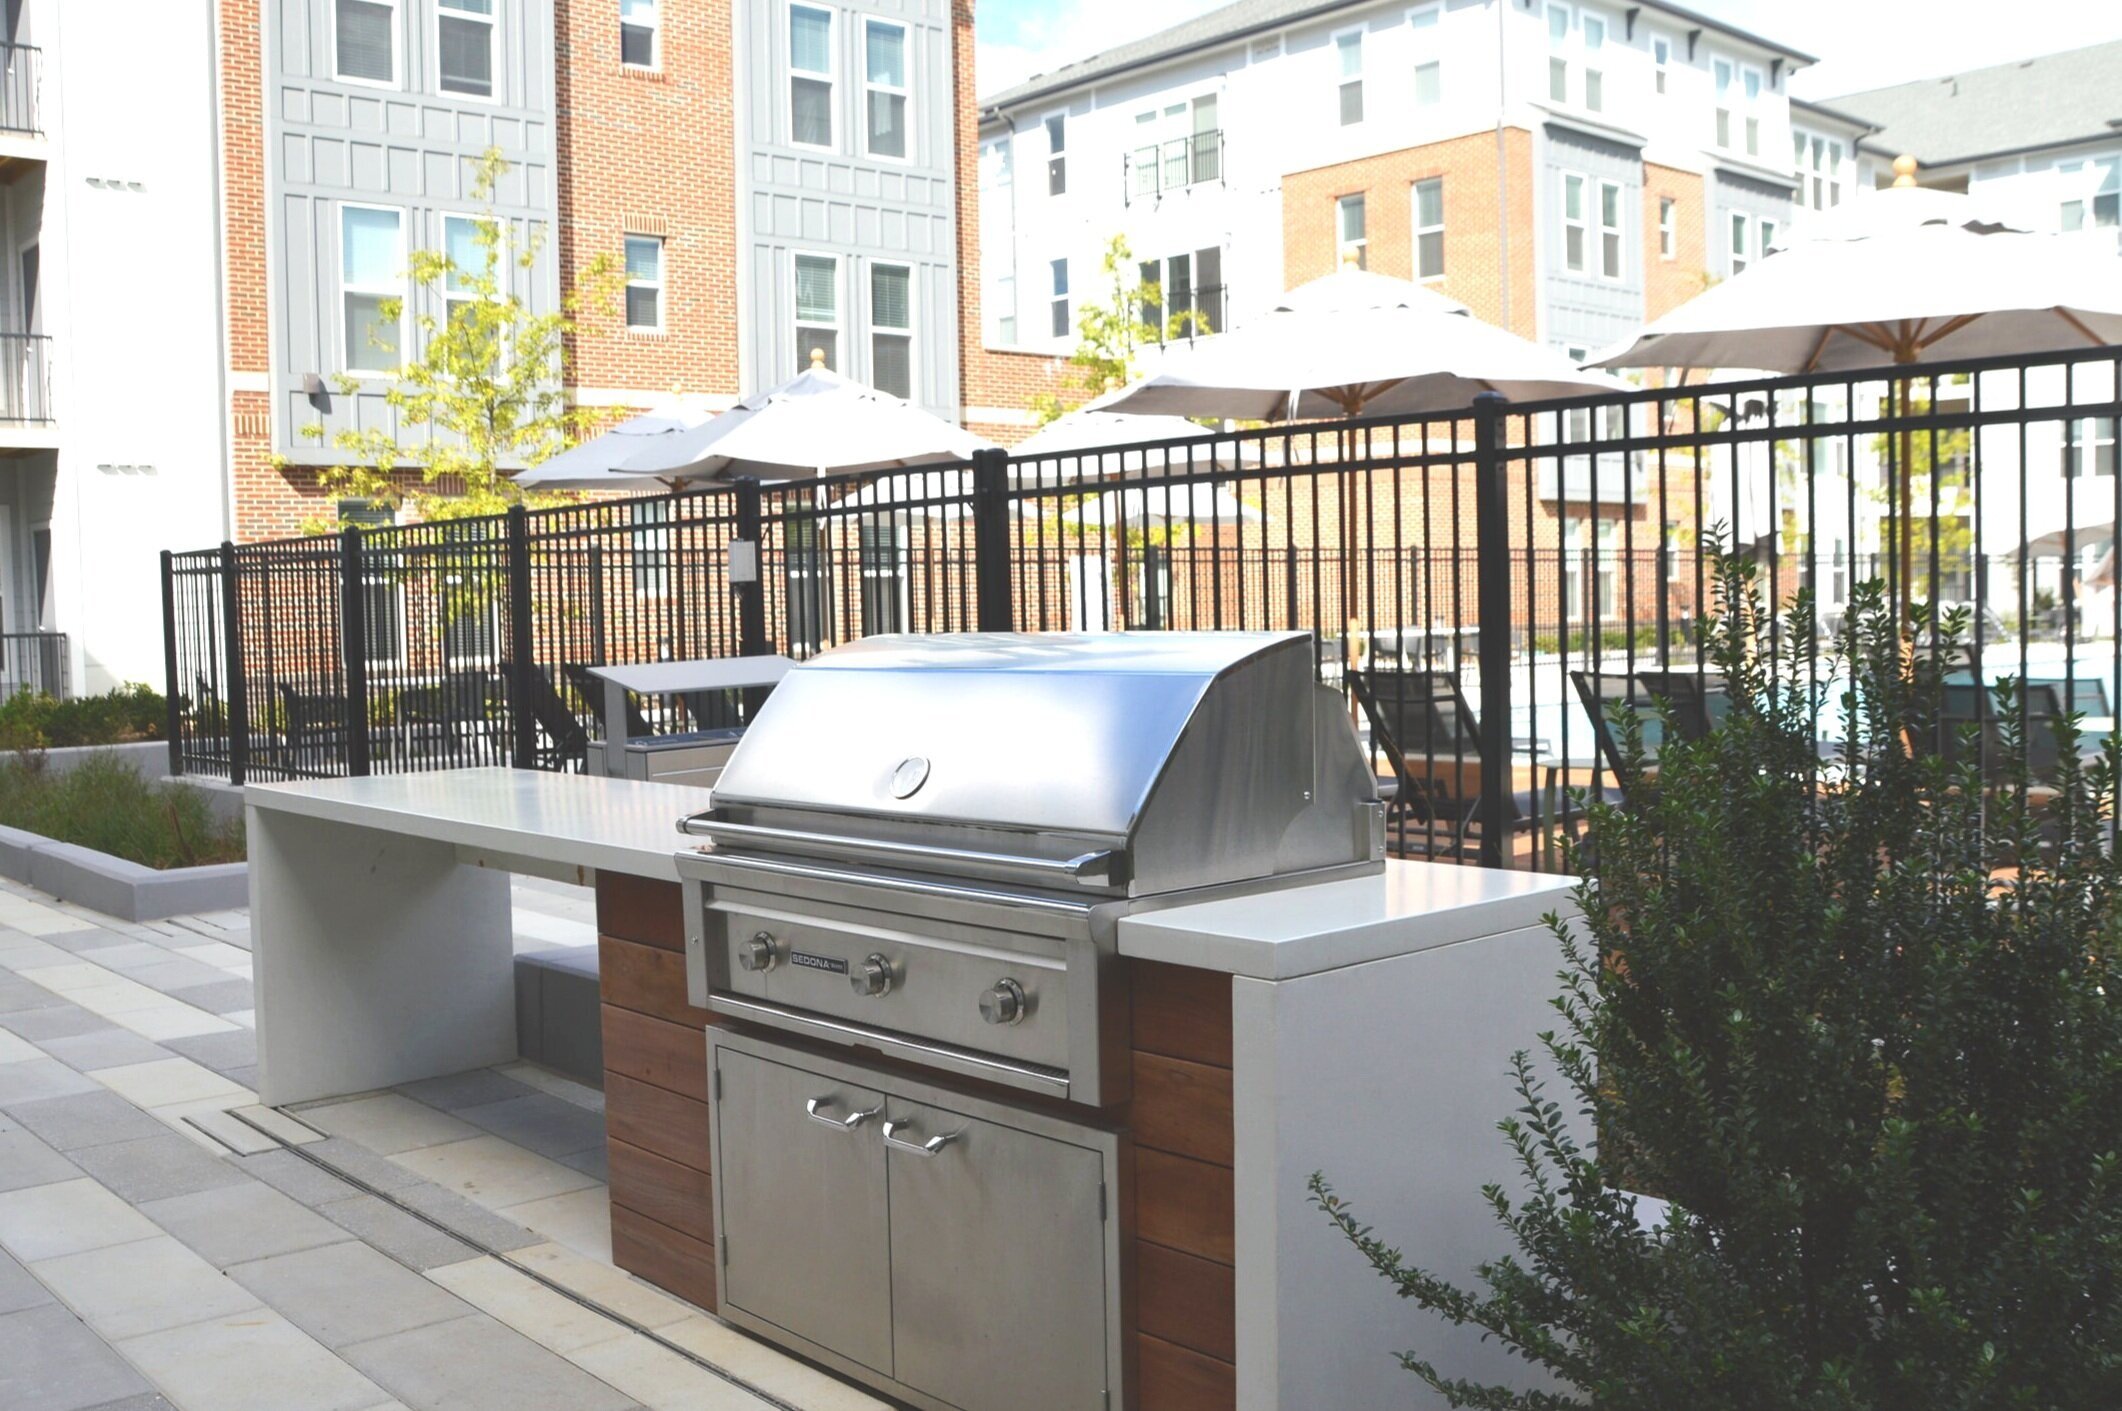 Grill Stations at Monarch Gambrills, MD